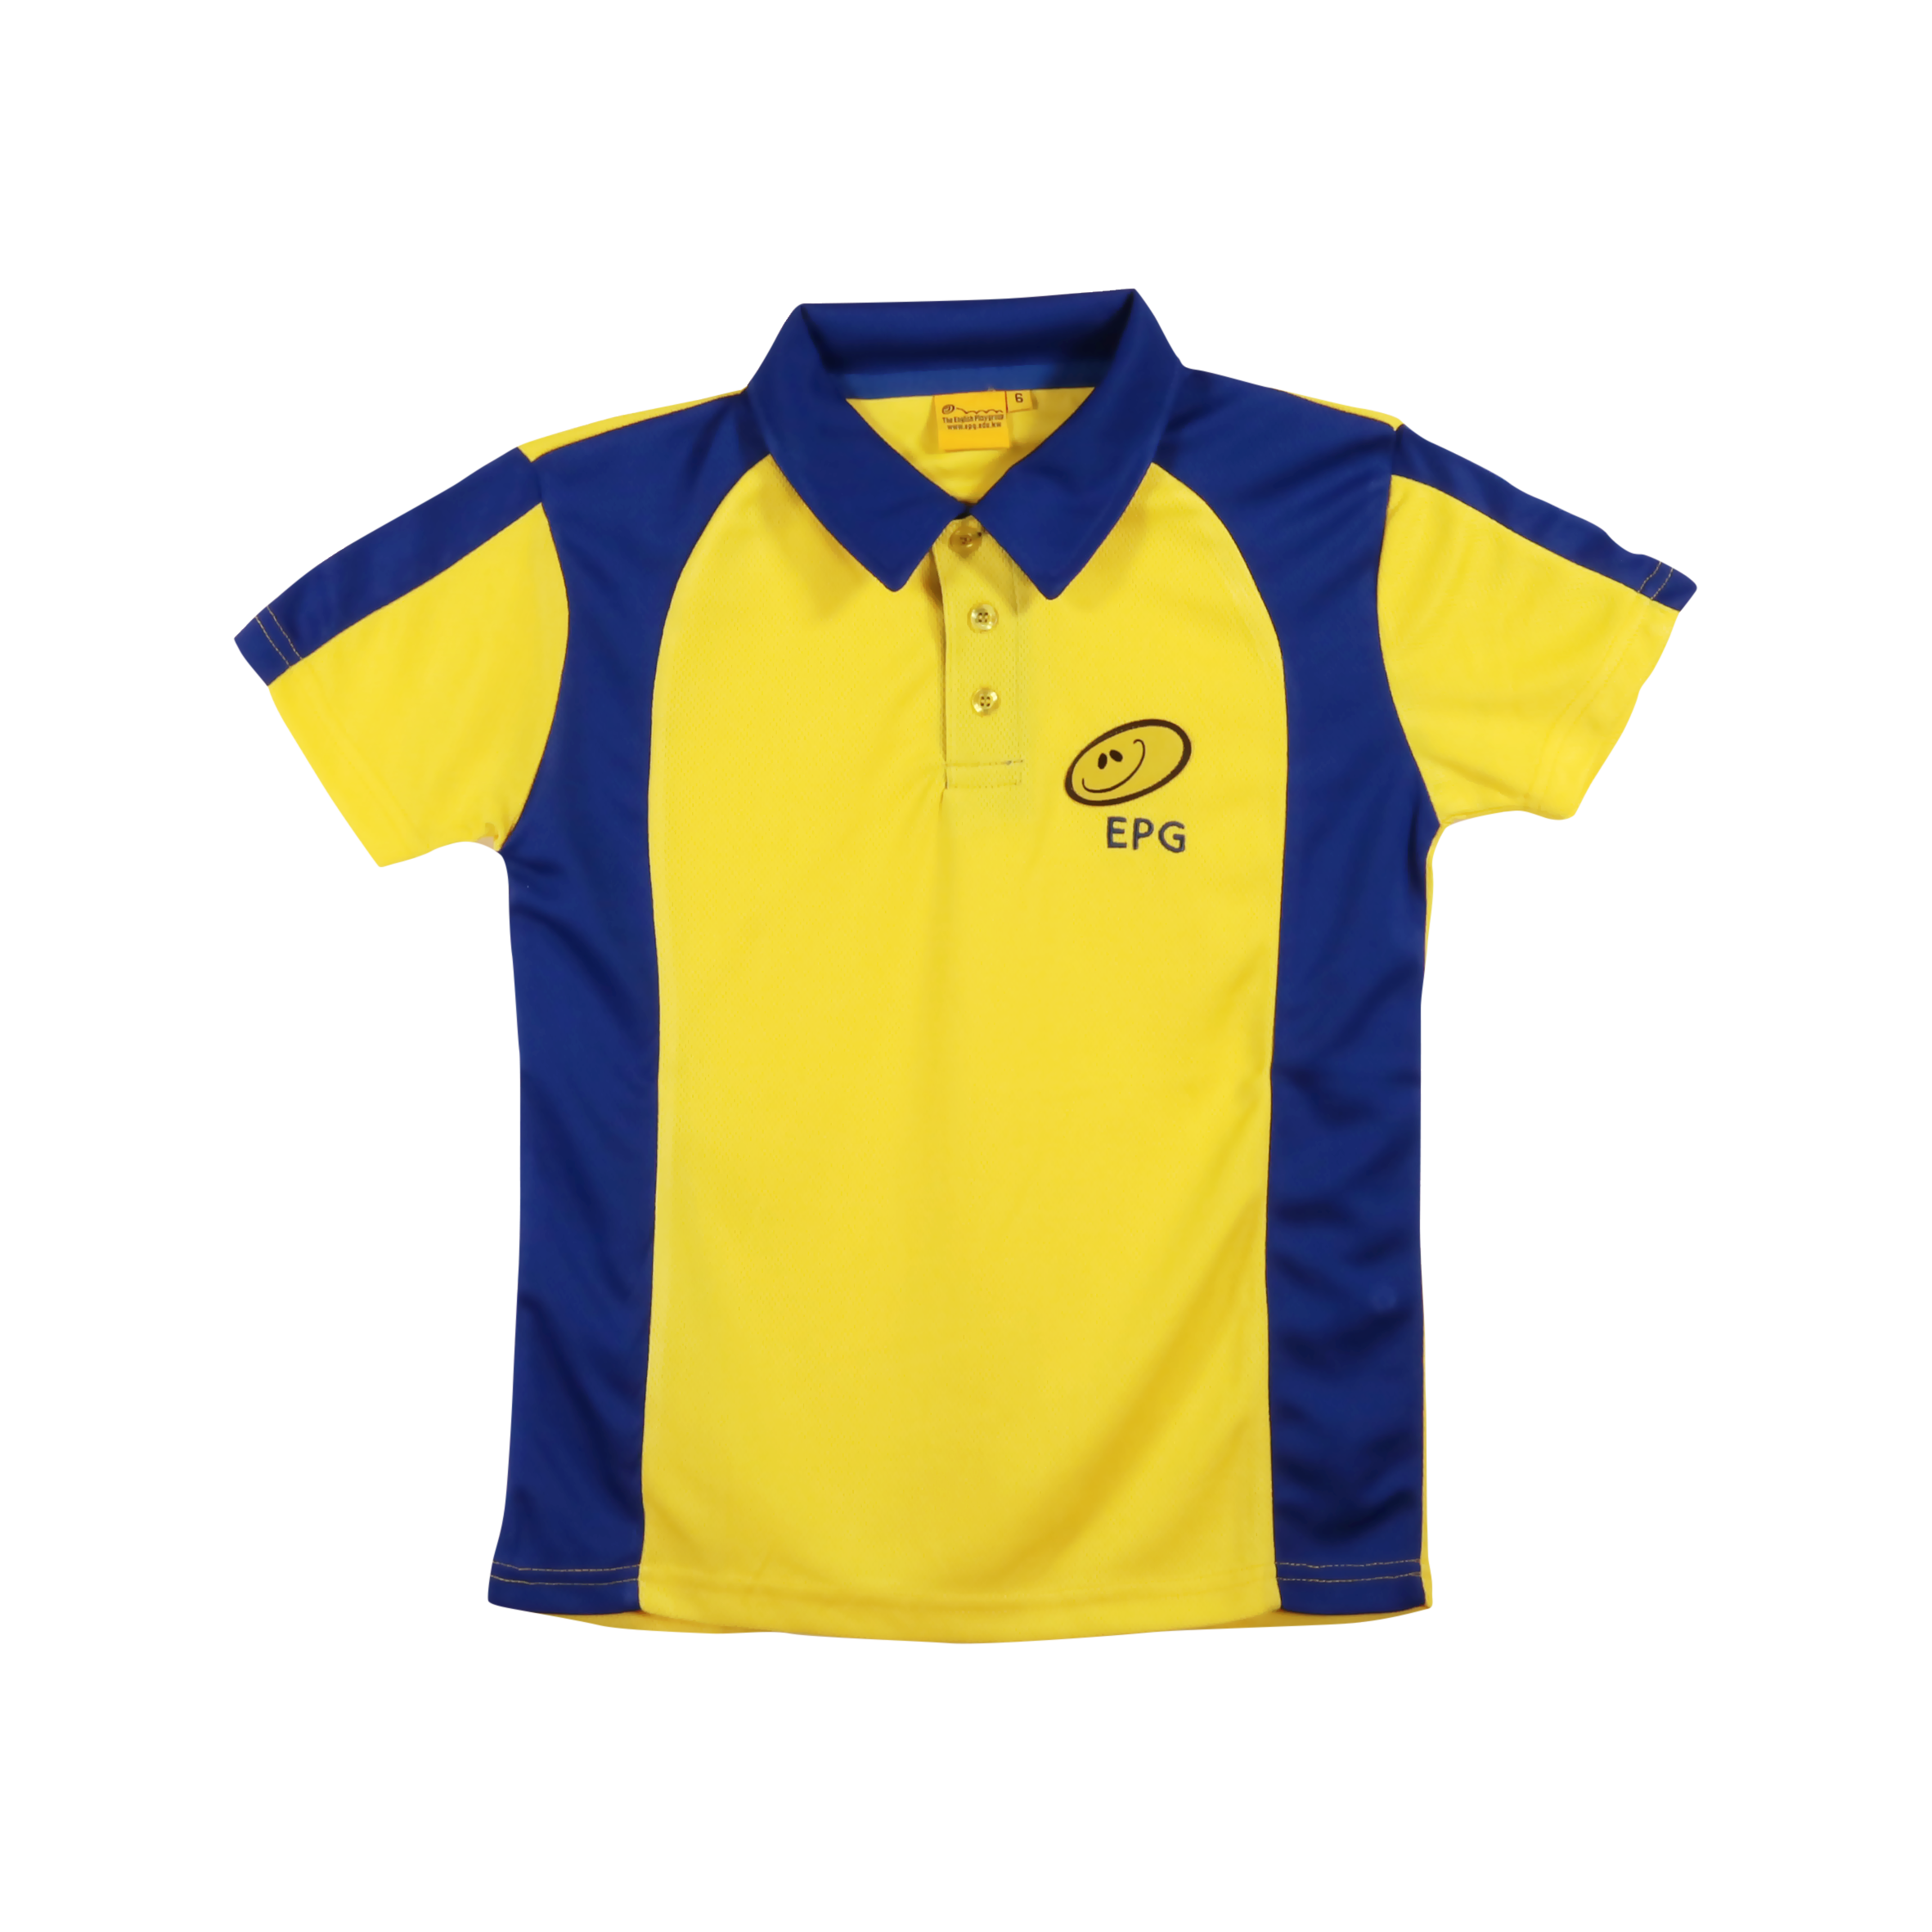 Early Year PE Summer Shirt for Boys and Girls